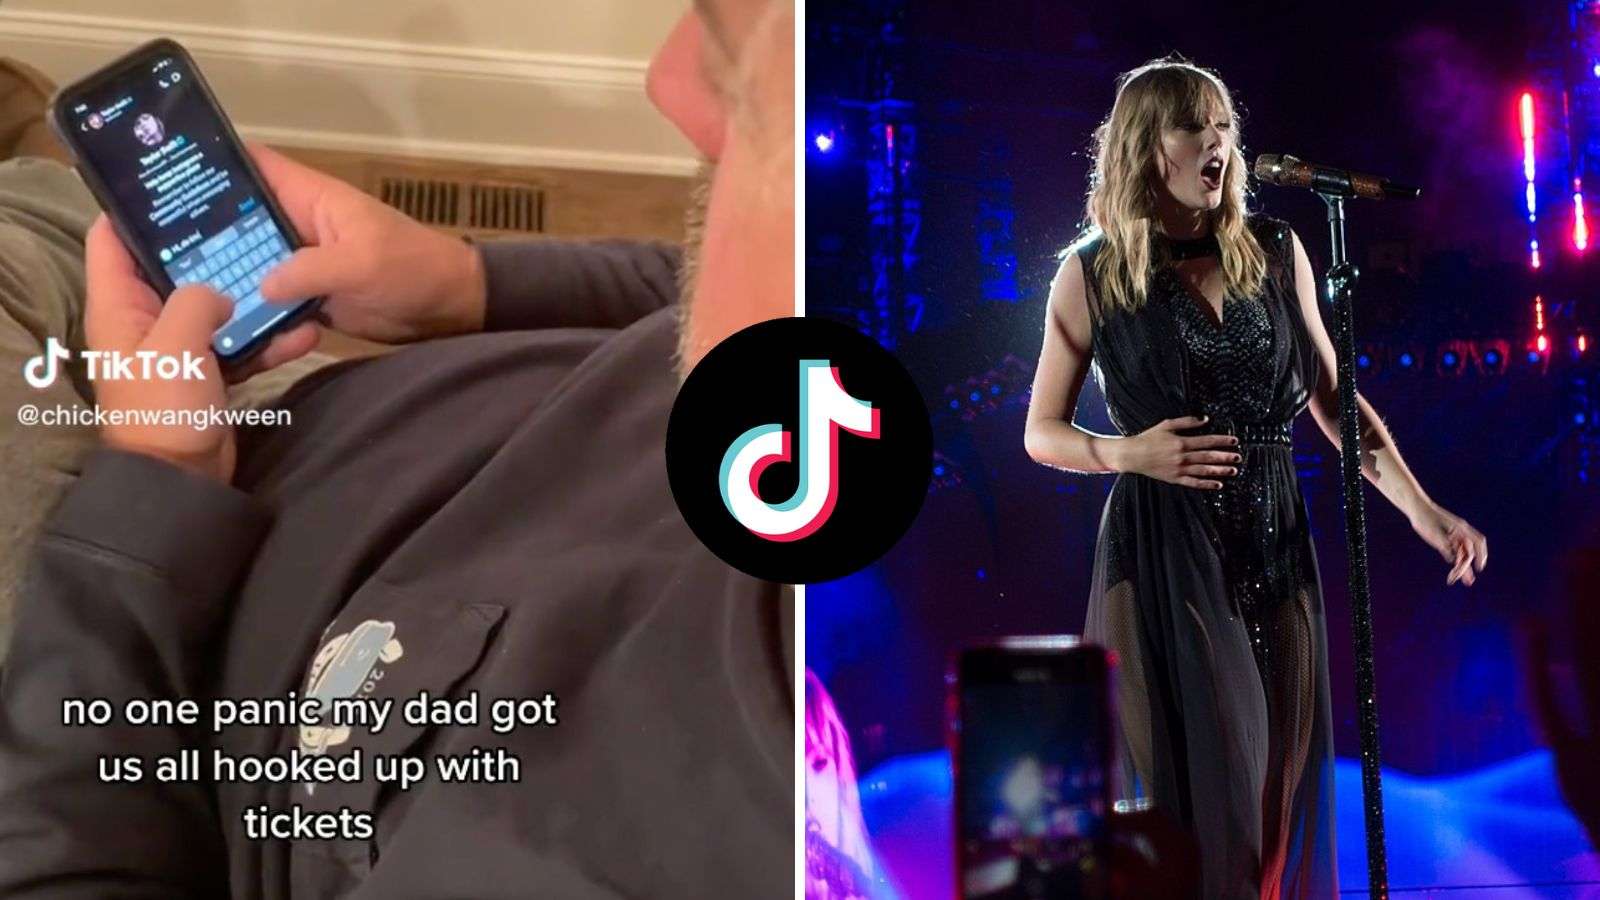 TikToker goes viral showing dad's hilarious attempt to get Taylor Swift tickets